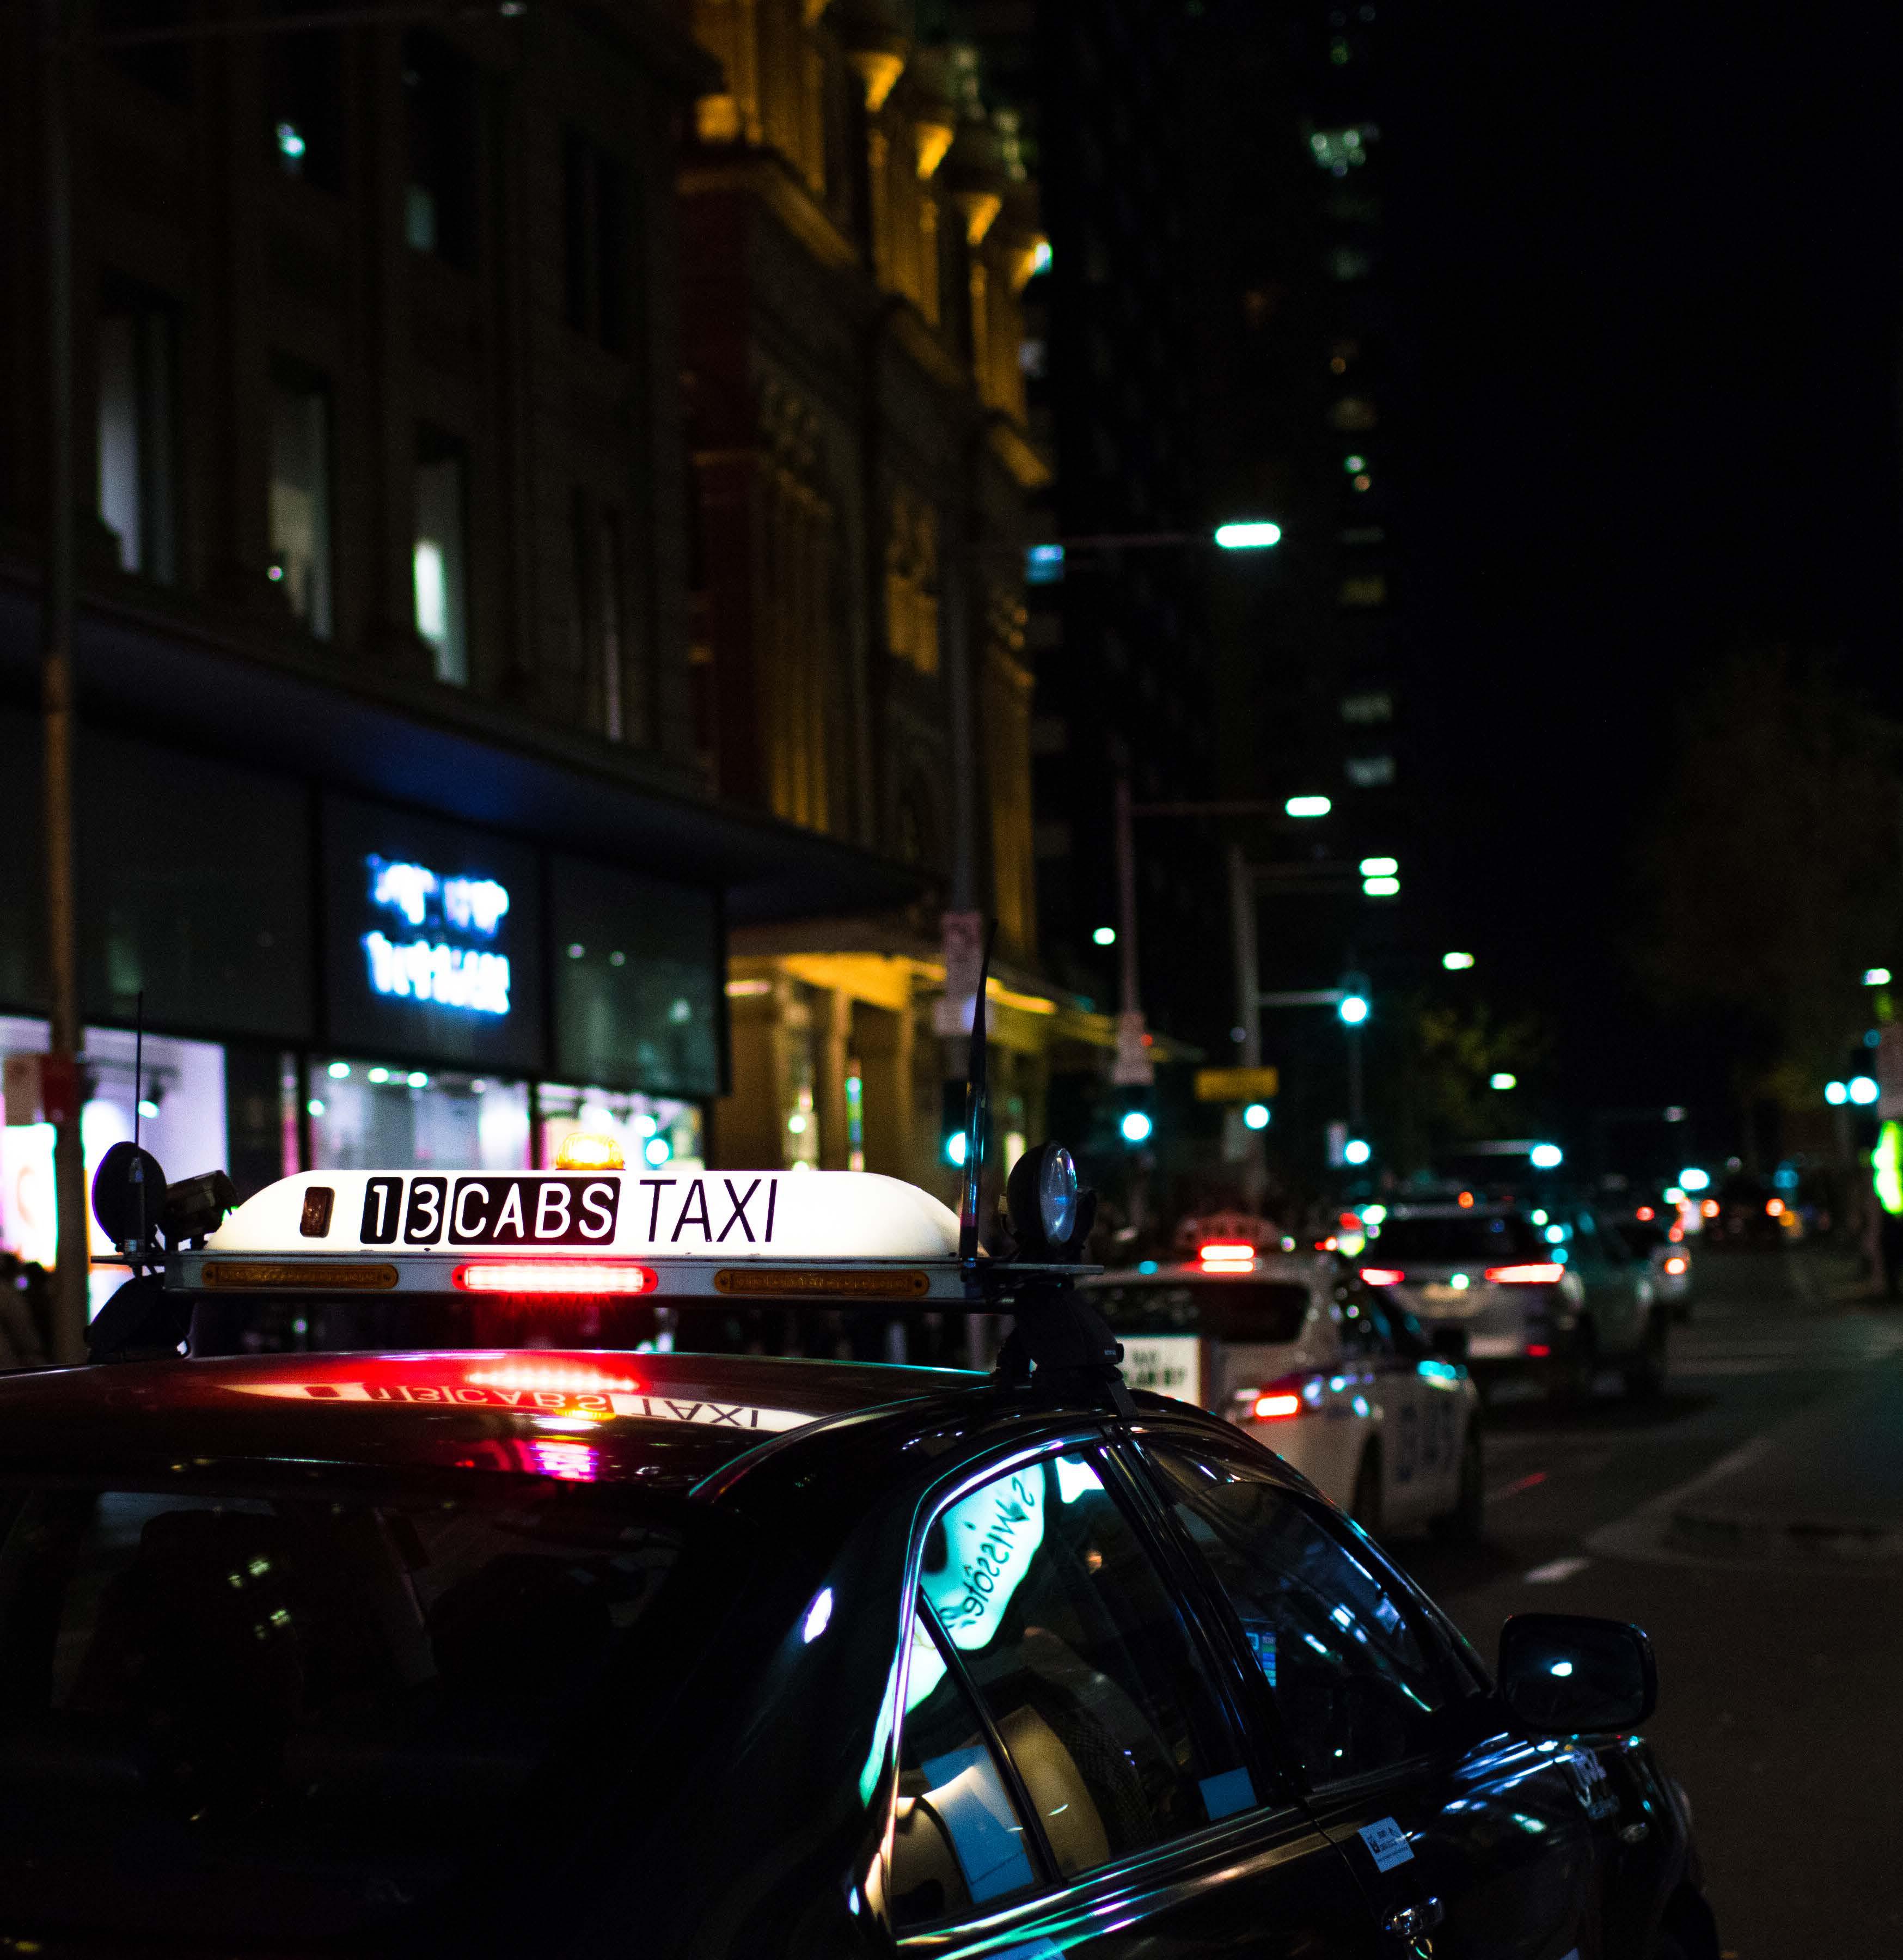 Case Study: How Movement IoT and Edge Computing Combine to Optimise Sydney's Cycleway and Taxi Flow